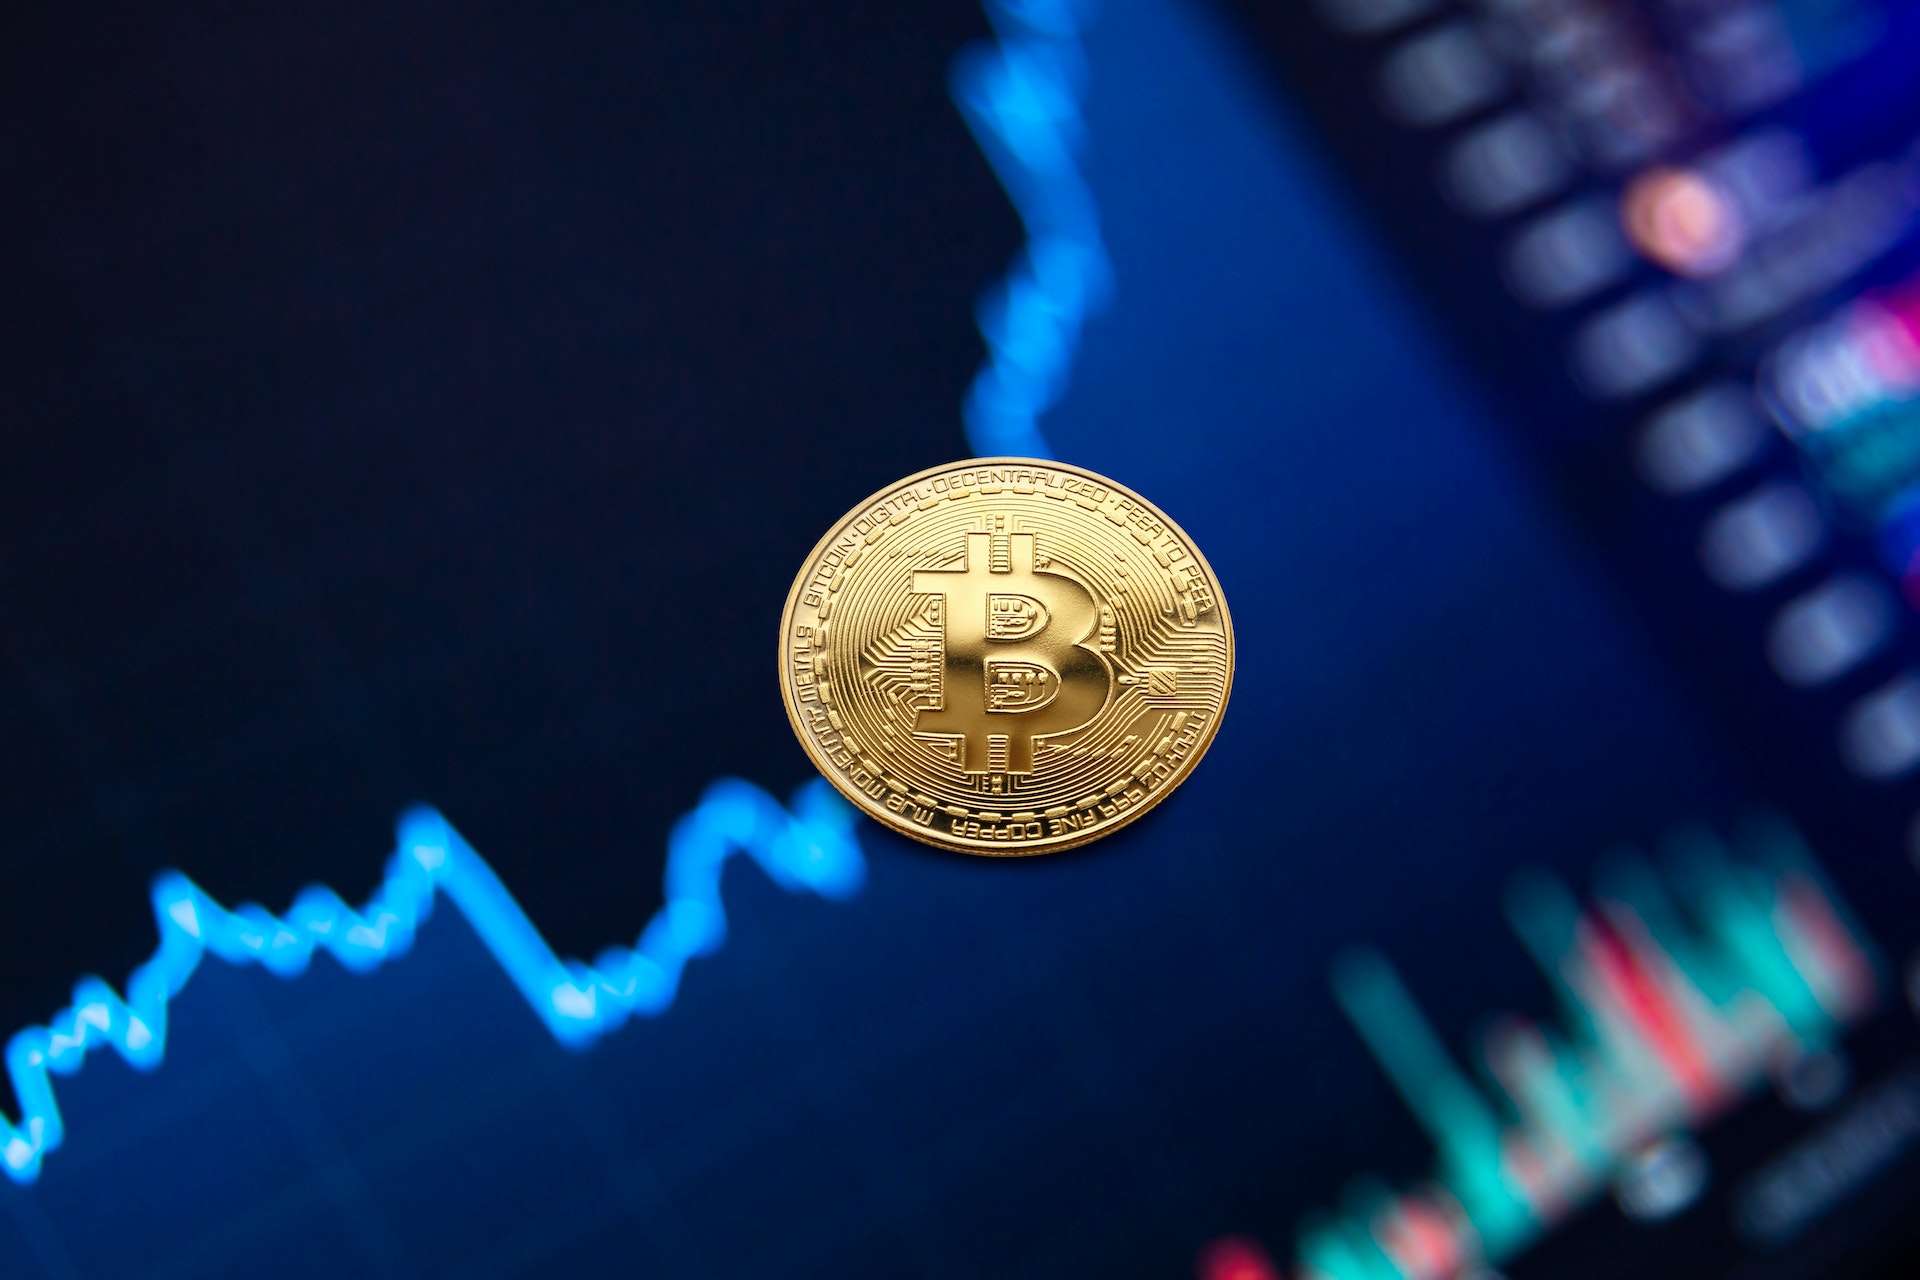 The value of Bitcoin has reached $27.2K, although recent studies suggest further declines could be on the horizon.